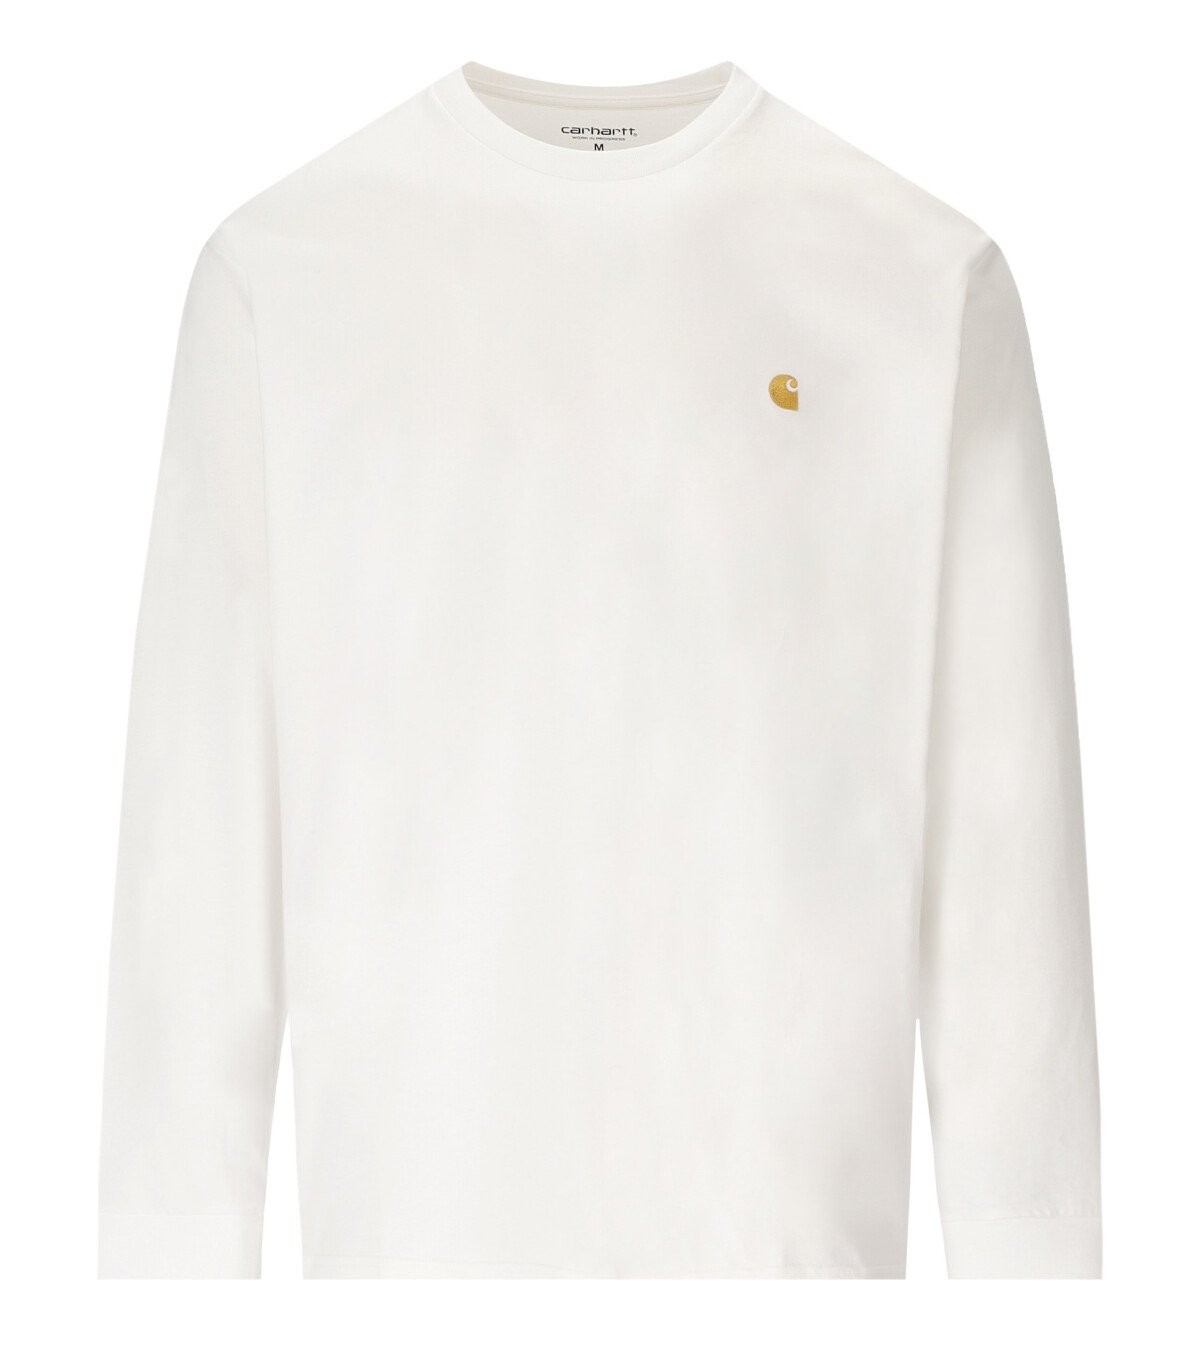 CARHARTT WIP L/S CHASE WHITE T-SHIRT